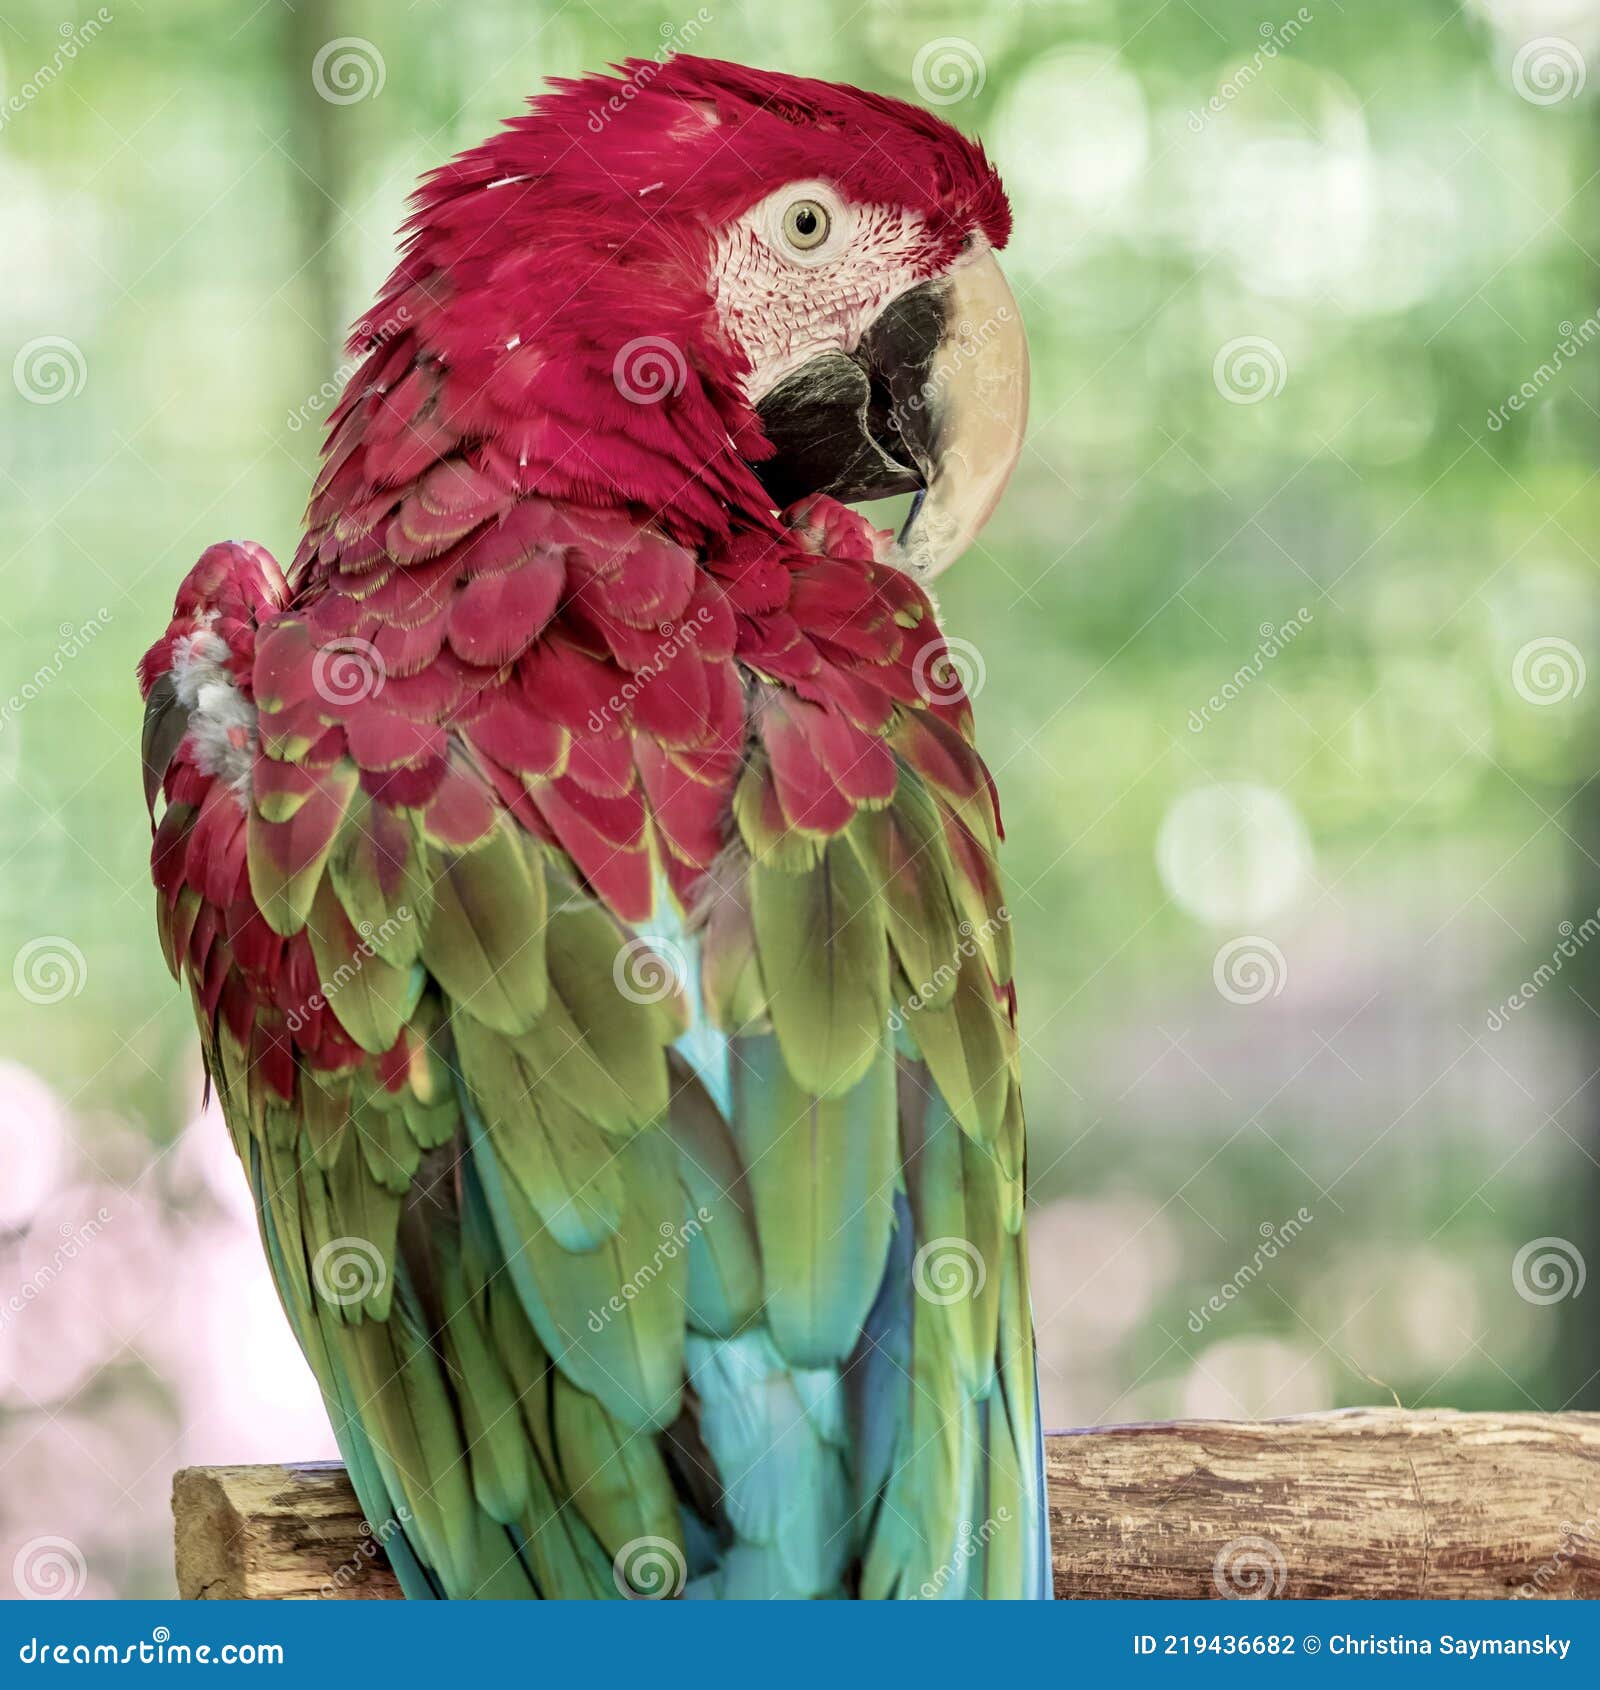 Tropical, Exotic, Talking, Macaw, Parrot, Bird, Wildlife Animal, Perched in  Nature with Vibrant Colors and Eyes Looking at You Stock Photo - Image of  avian, tropical: 219436682